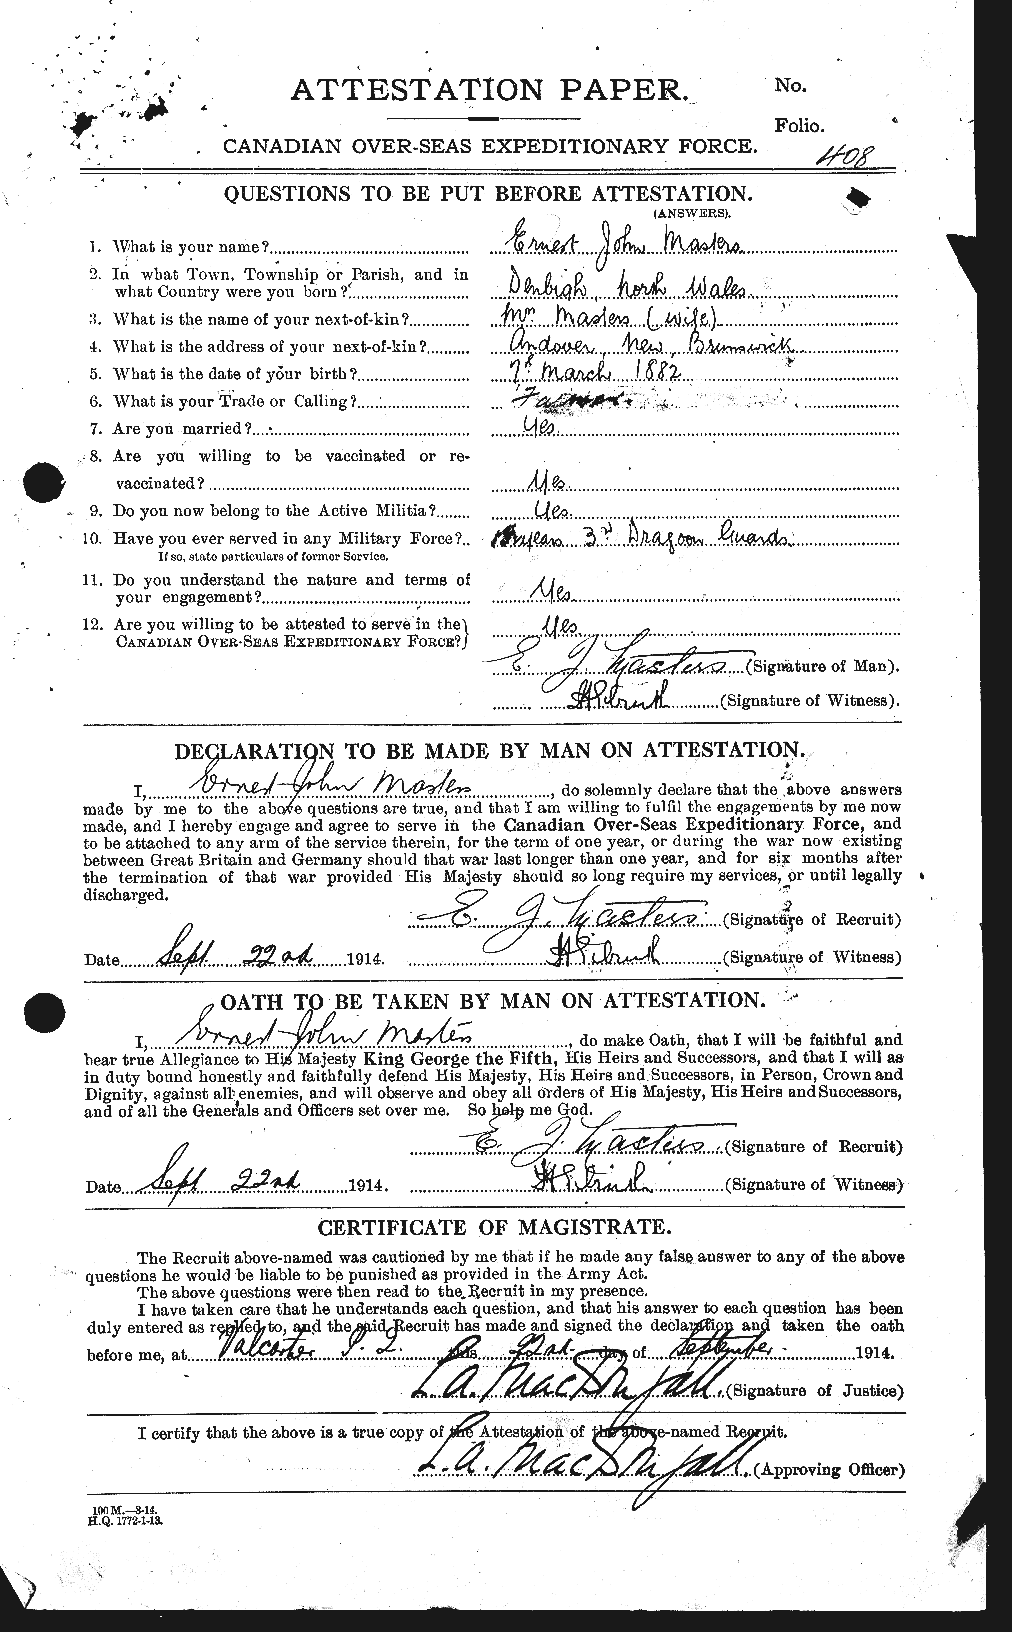 Personnel Records of the First World War - CEF 487319a